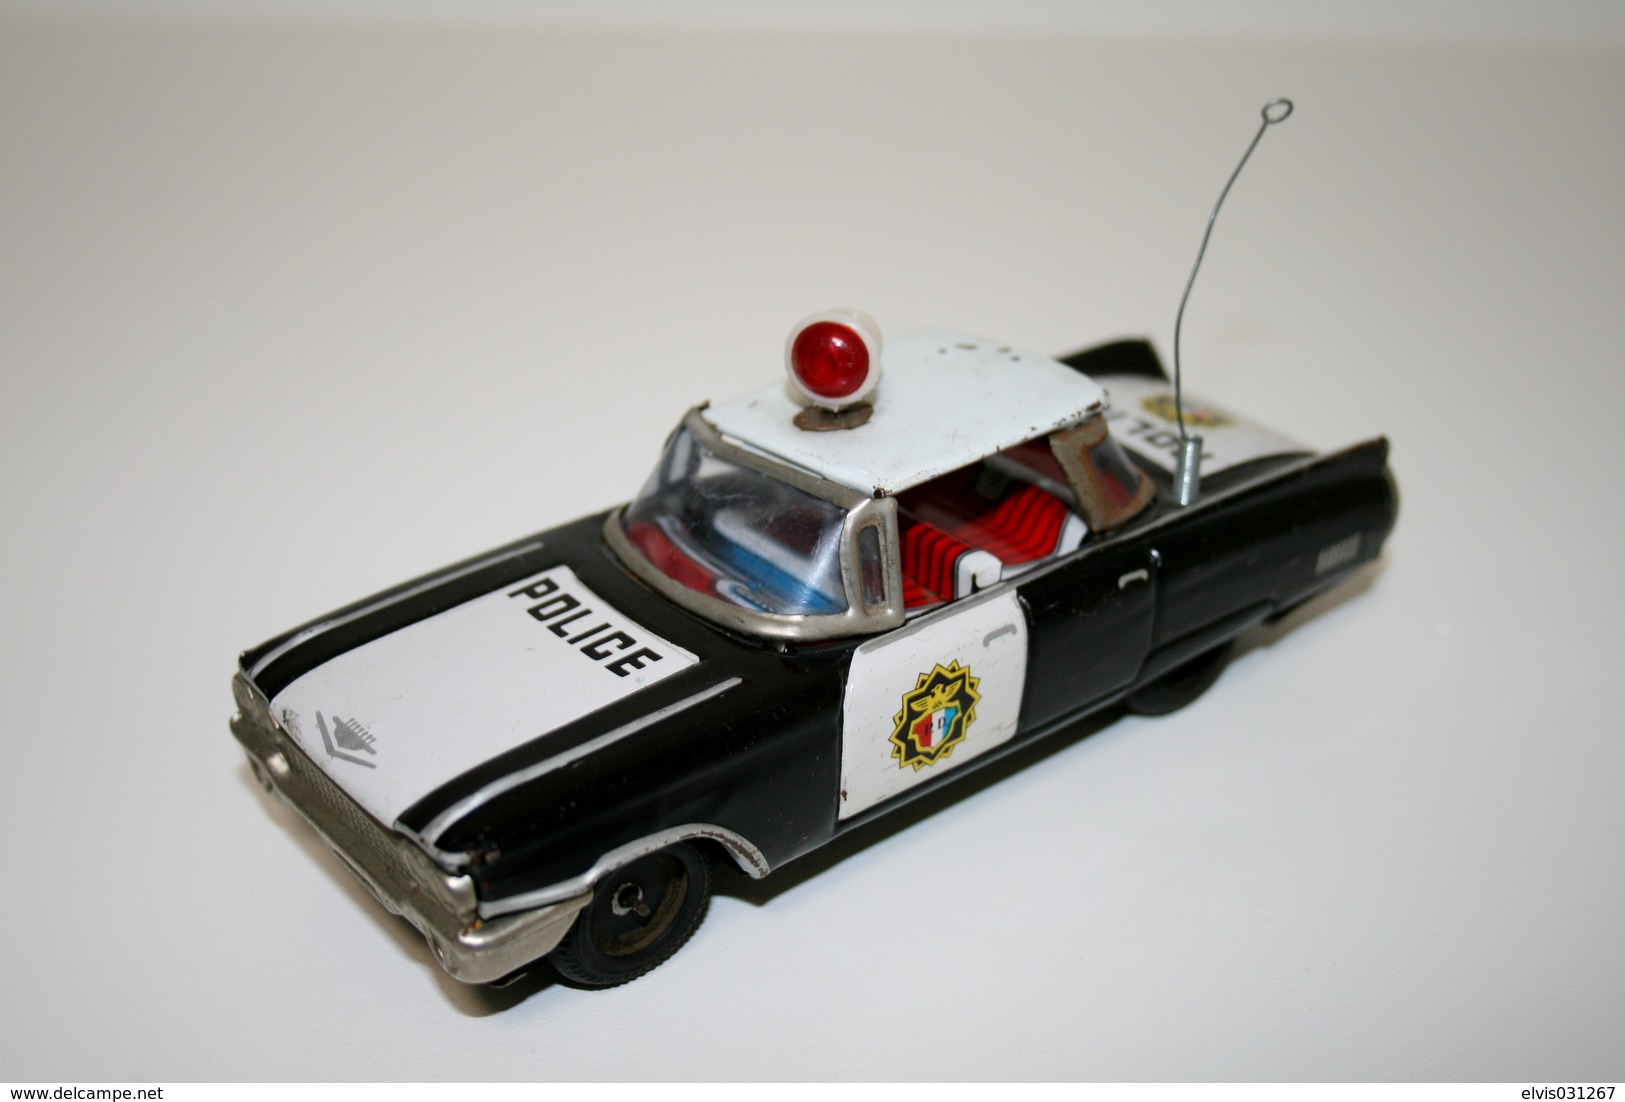 Vintage TIN TOY CAR : Maker ICHICO - Cadillac 4 Door Hardtop Rotating Roof Light POLICE - 15cm - JAPAN - 1960 - Friction - Collectors E Strani - Tutte Marche